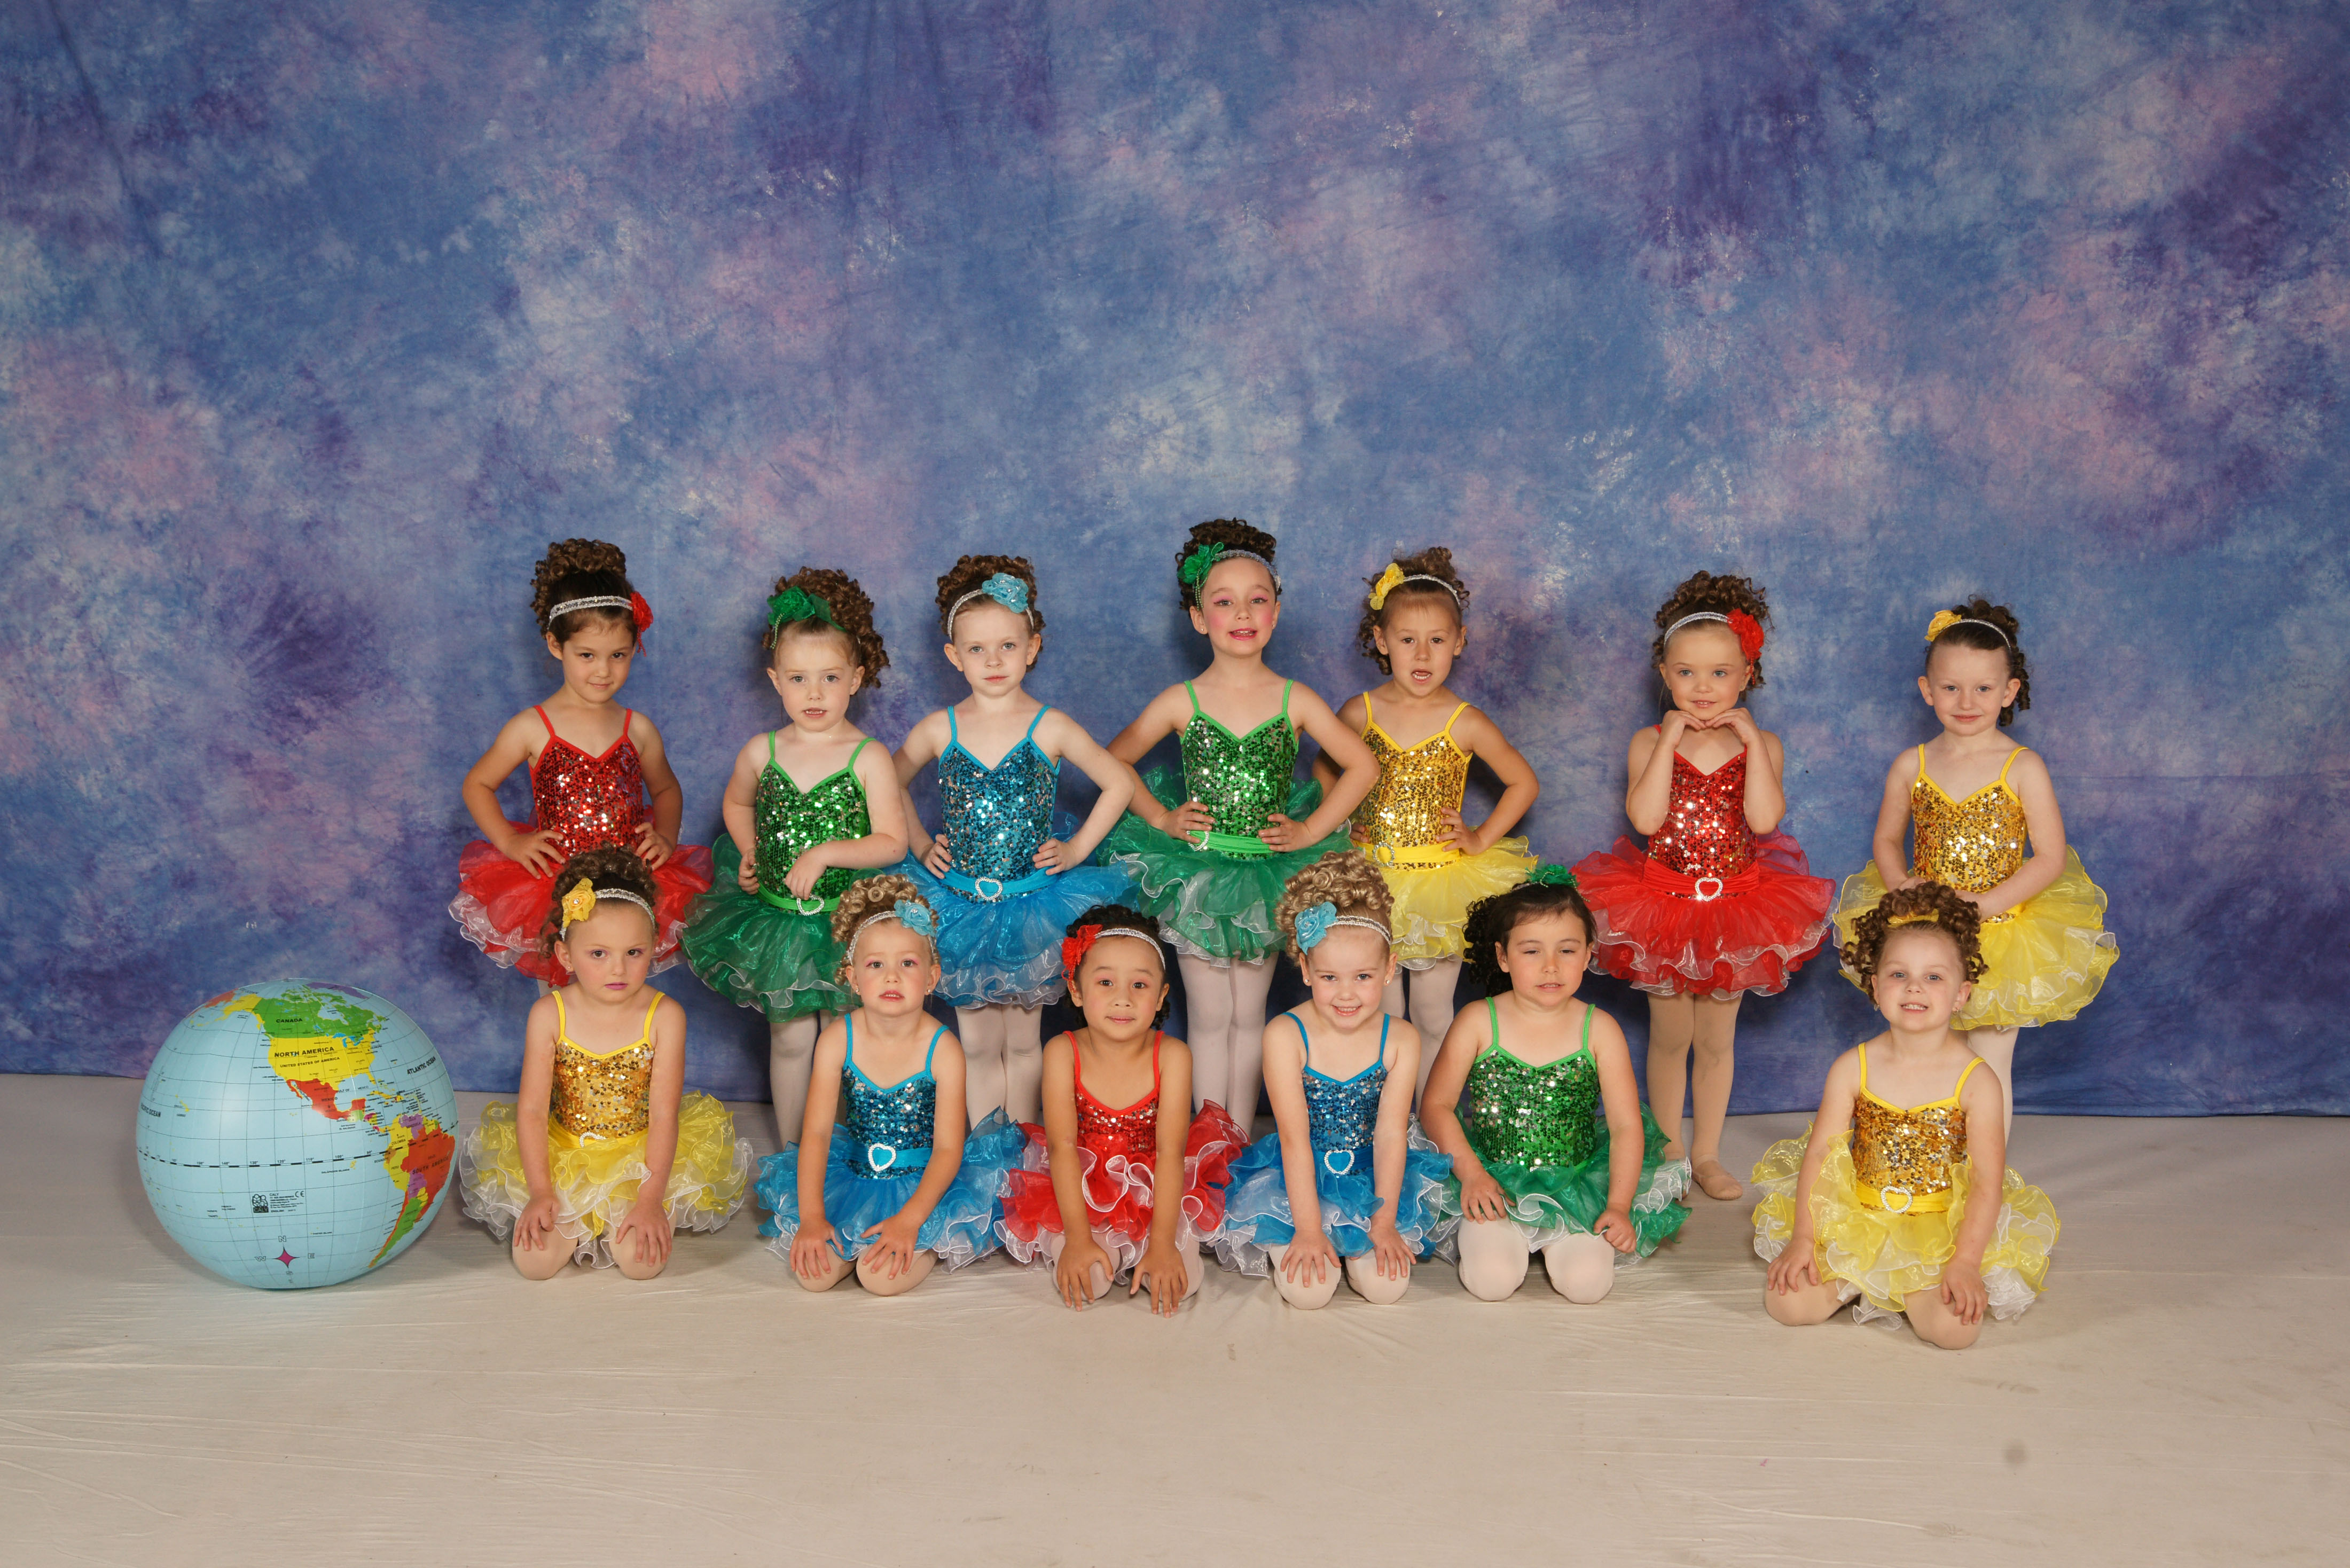 Tiny Dazzlers – It’s a small world.